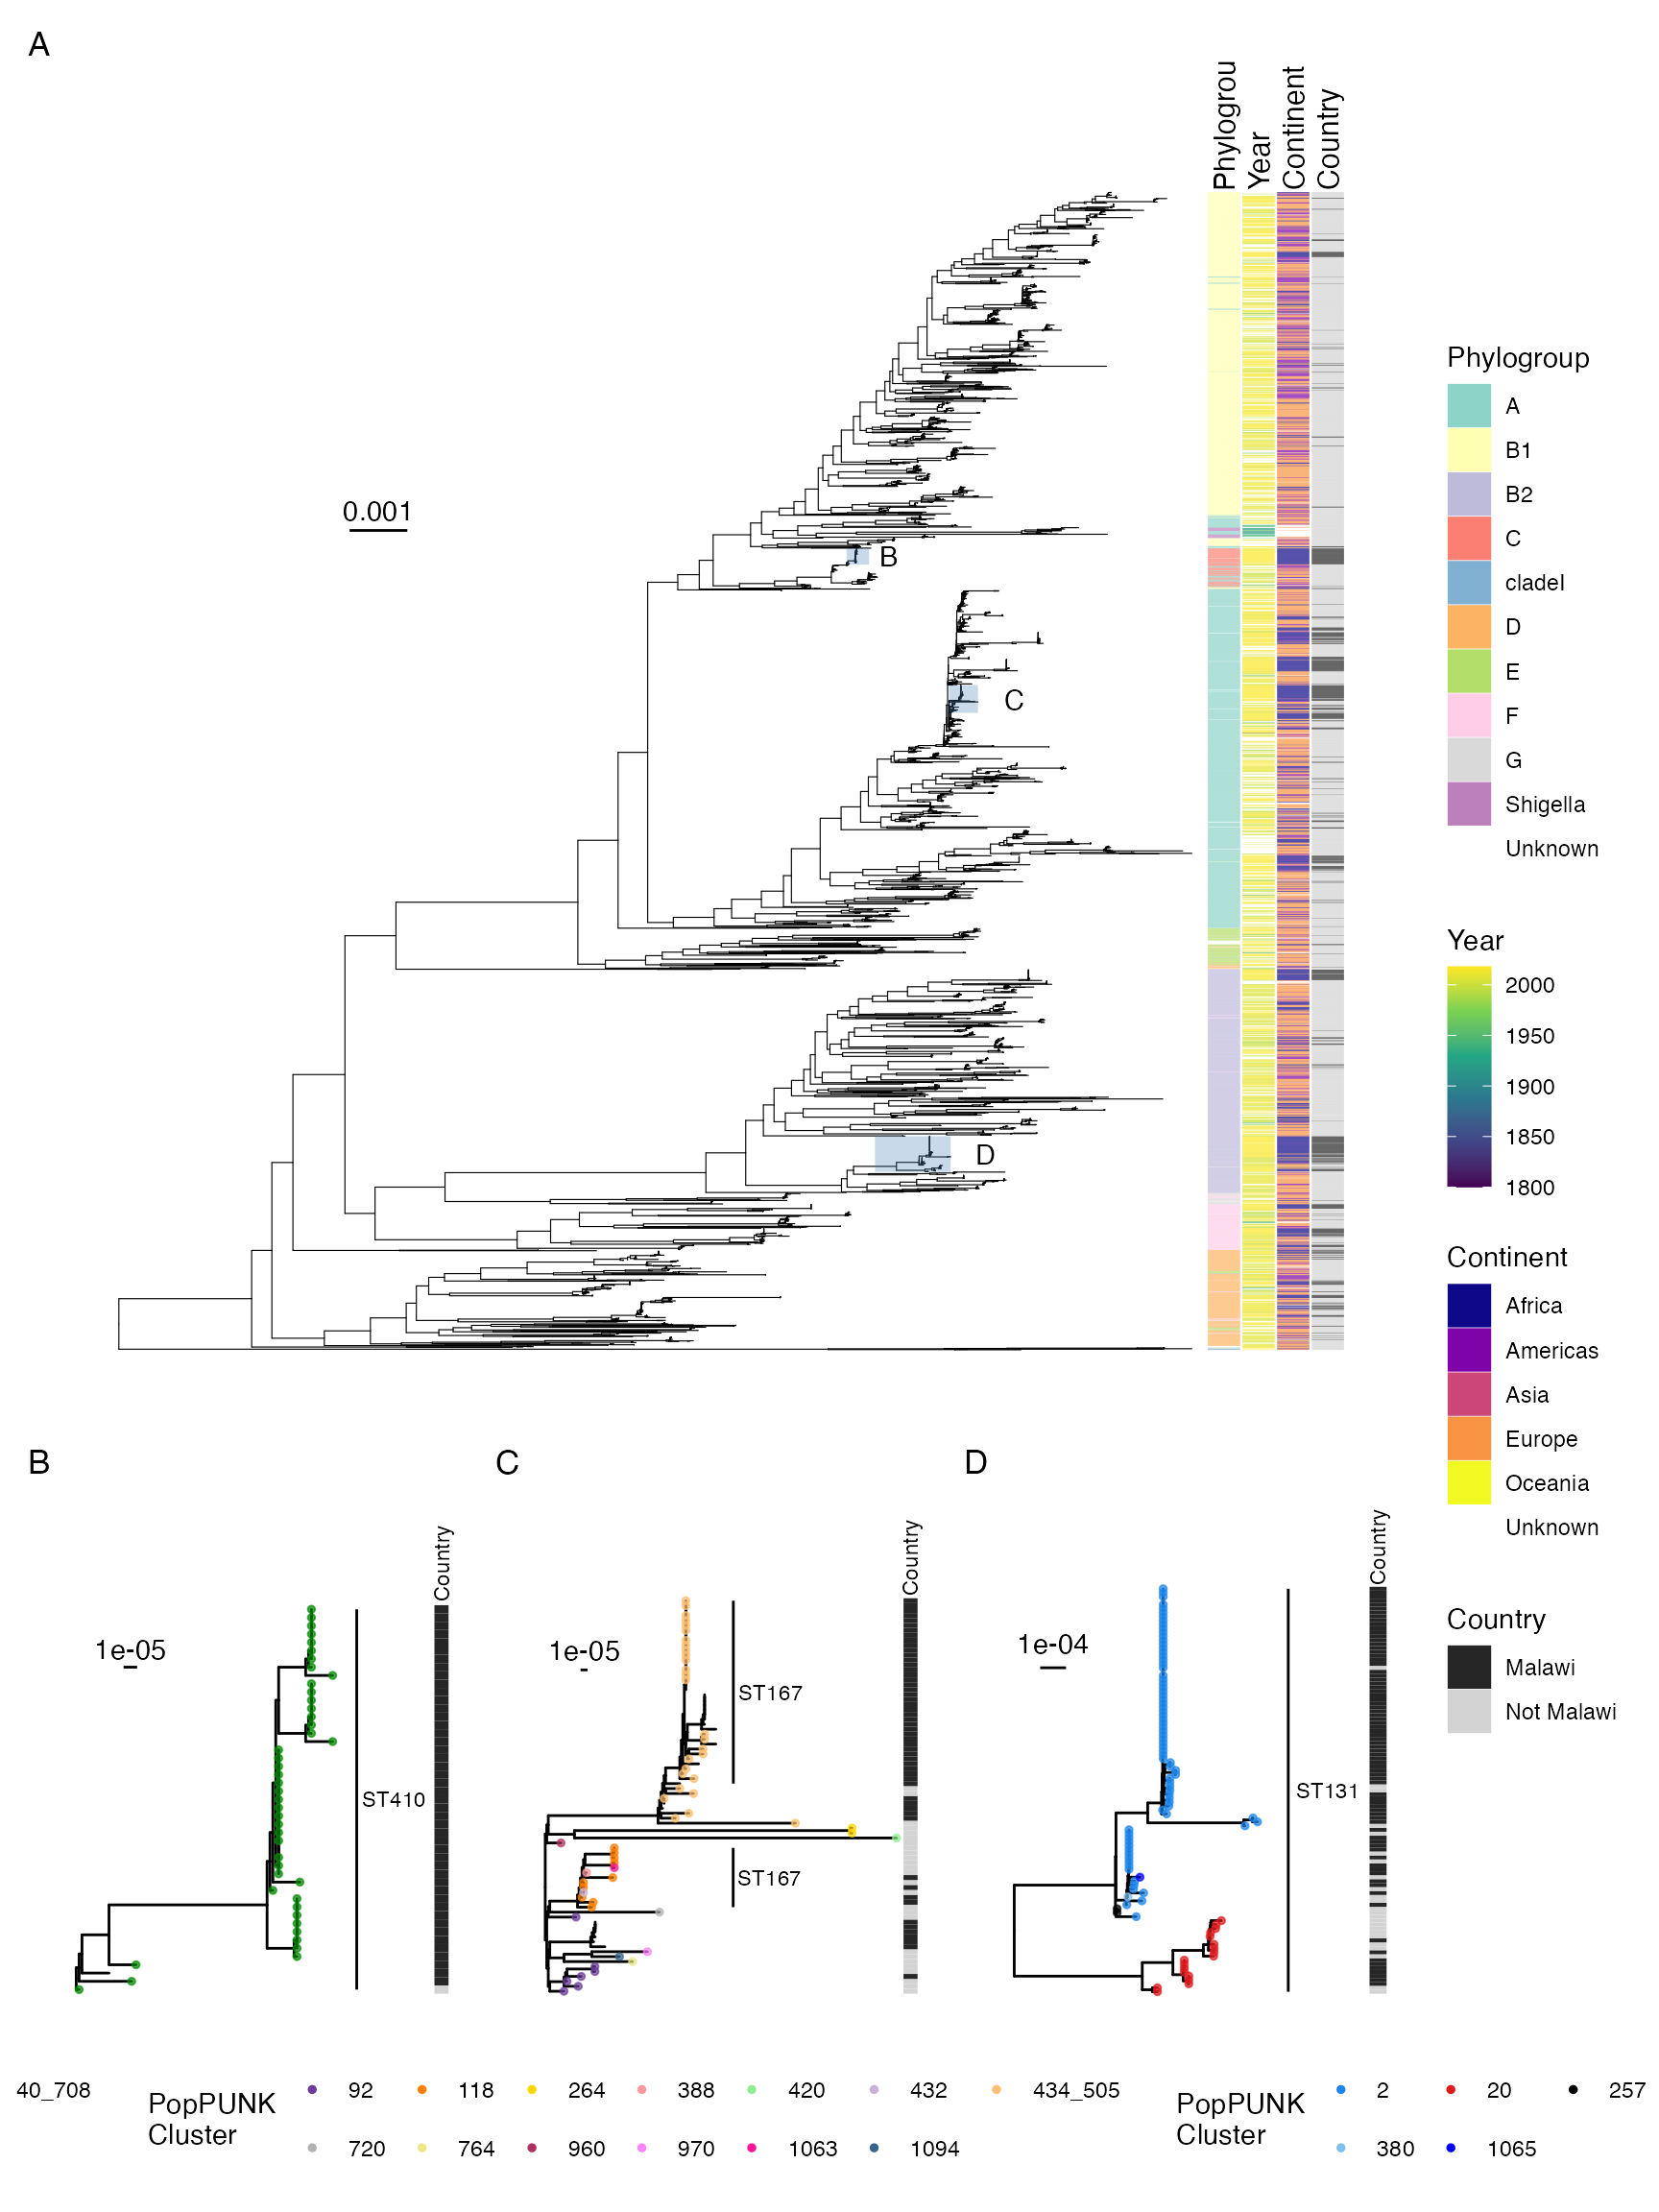 A: Malawian E. coli isolates in a global phylogeny. All genomes from Musicha et al along with 500 context genomes from Horesh et al are included. Heatmaps show Phylogroup, year of collection, continent of collection and country (Malawi vs other). Highlighted areas and subtrees B-D show the phylogenetic context of the three commonest STs in this study: ST410 (B), ST167 (C) and ST131 (D). The tree tips in the subtree plots are coloured by popPUNK cluster assignment, with novel clusters that were not identified in the original Horesh collection given no color.